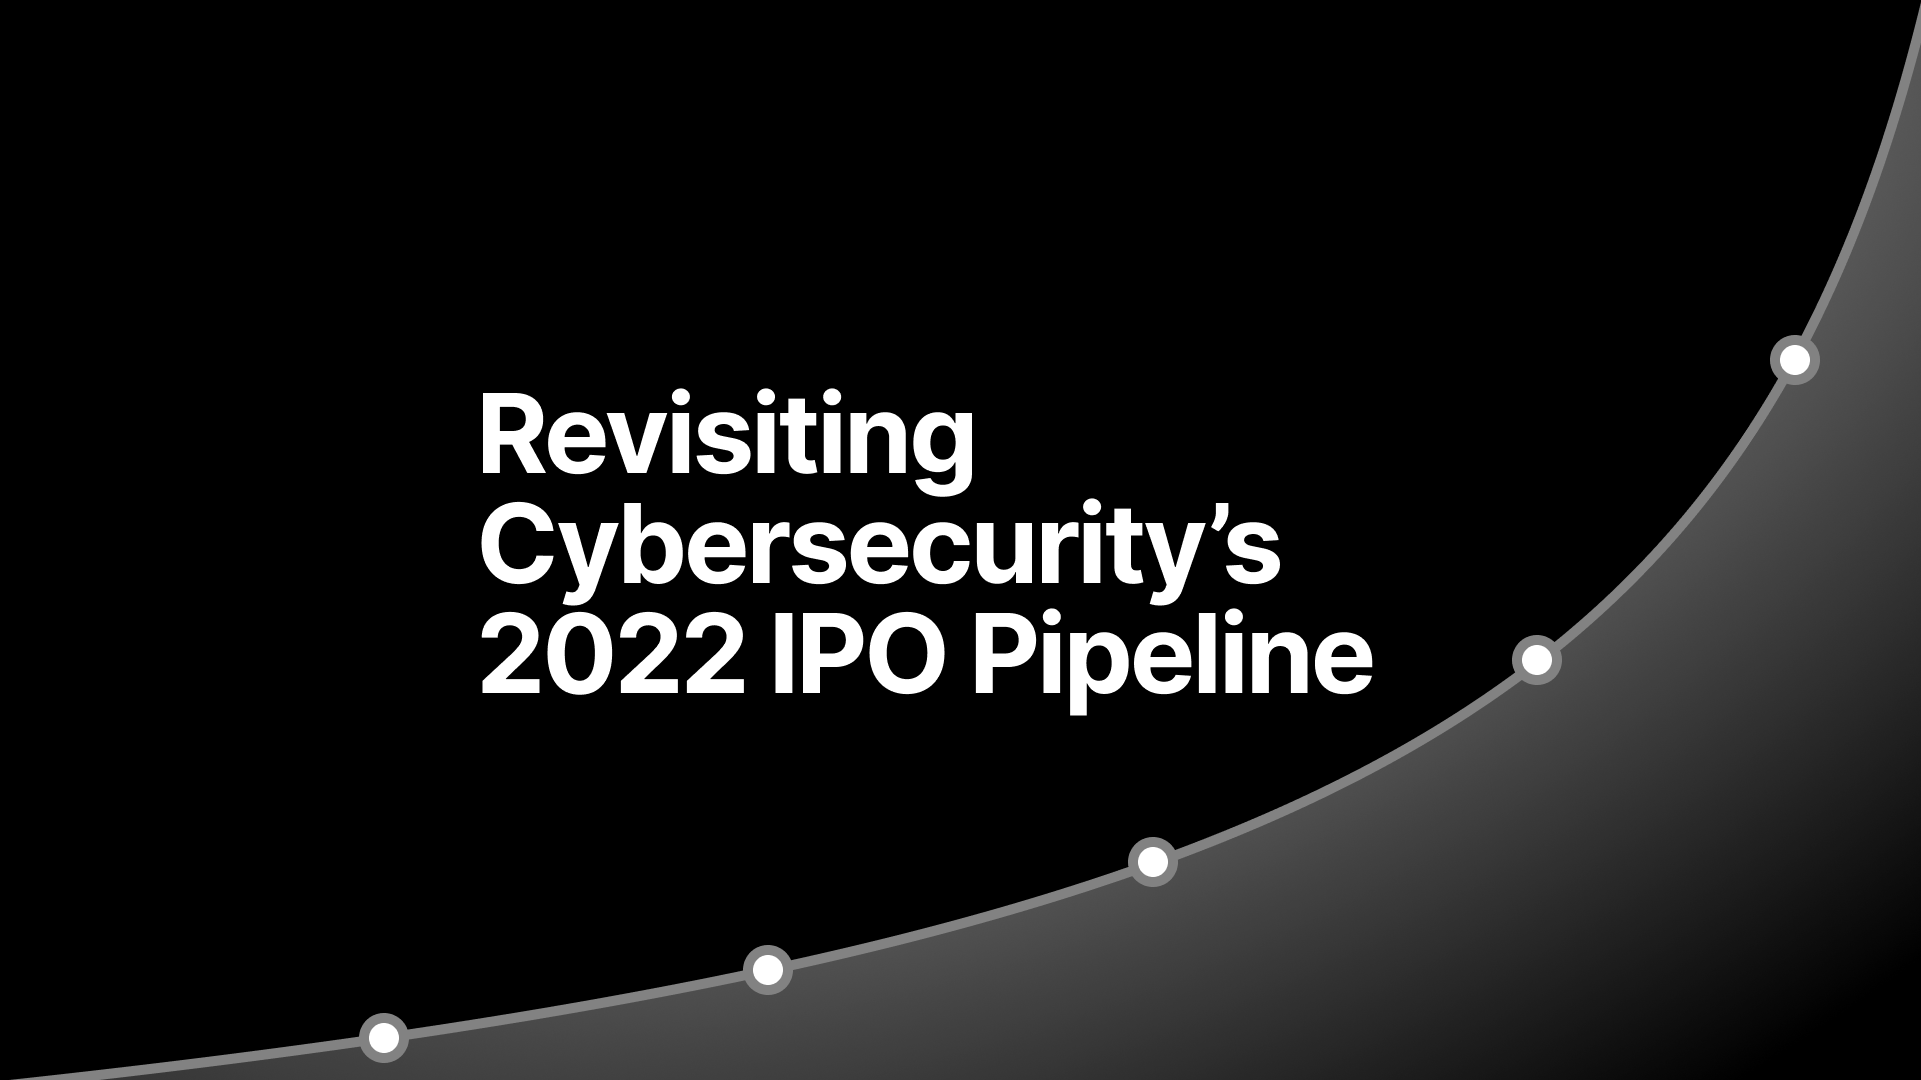 Revisiting Cybersecurity’s 2022 IPO Pipeline